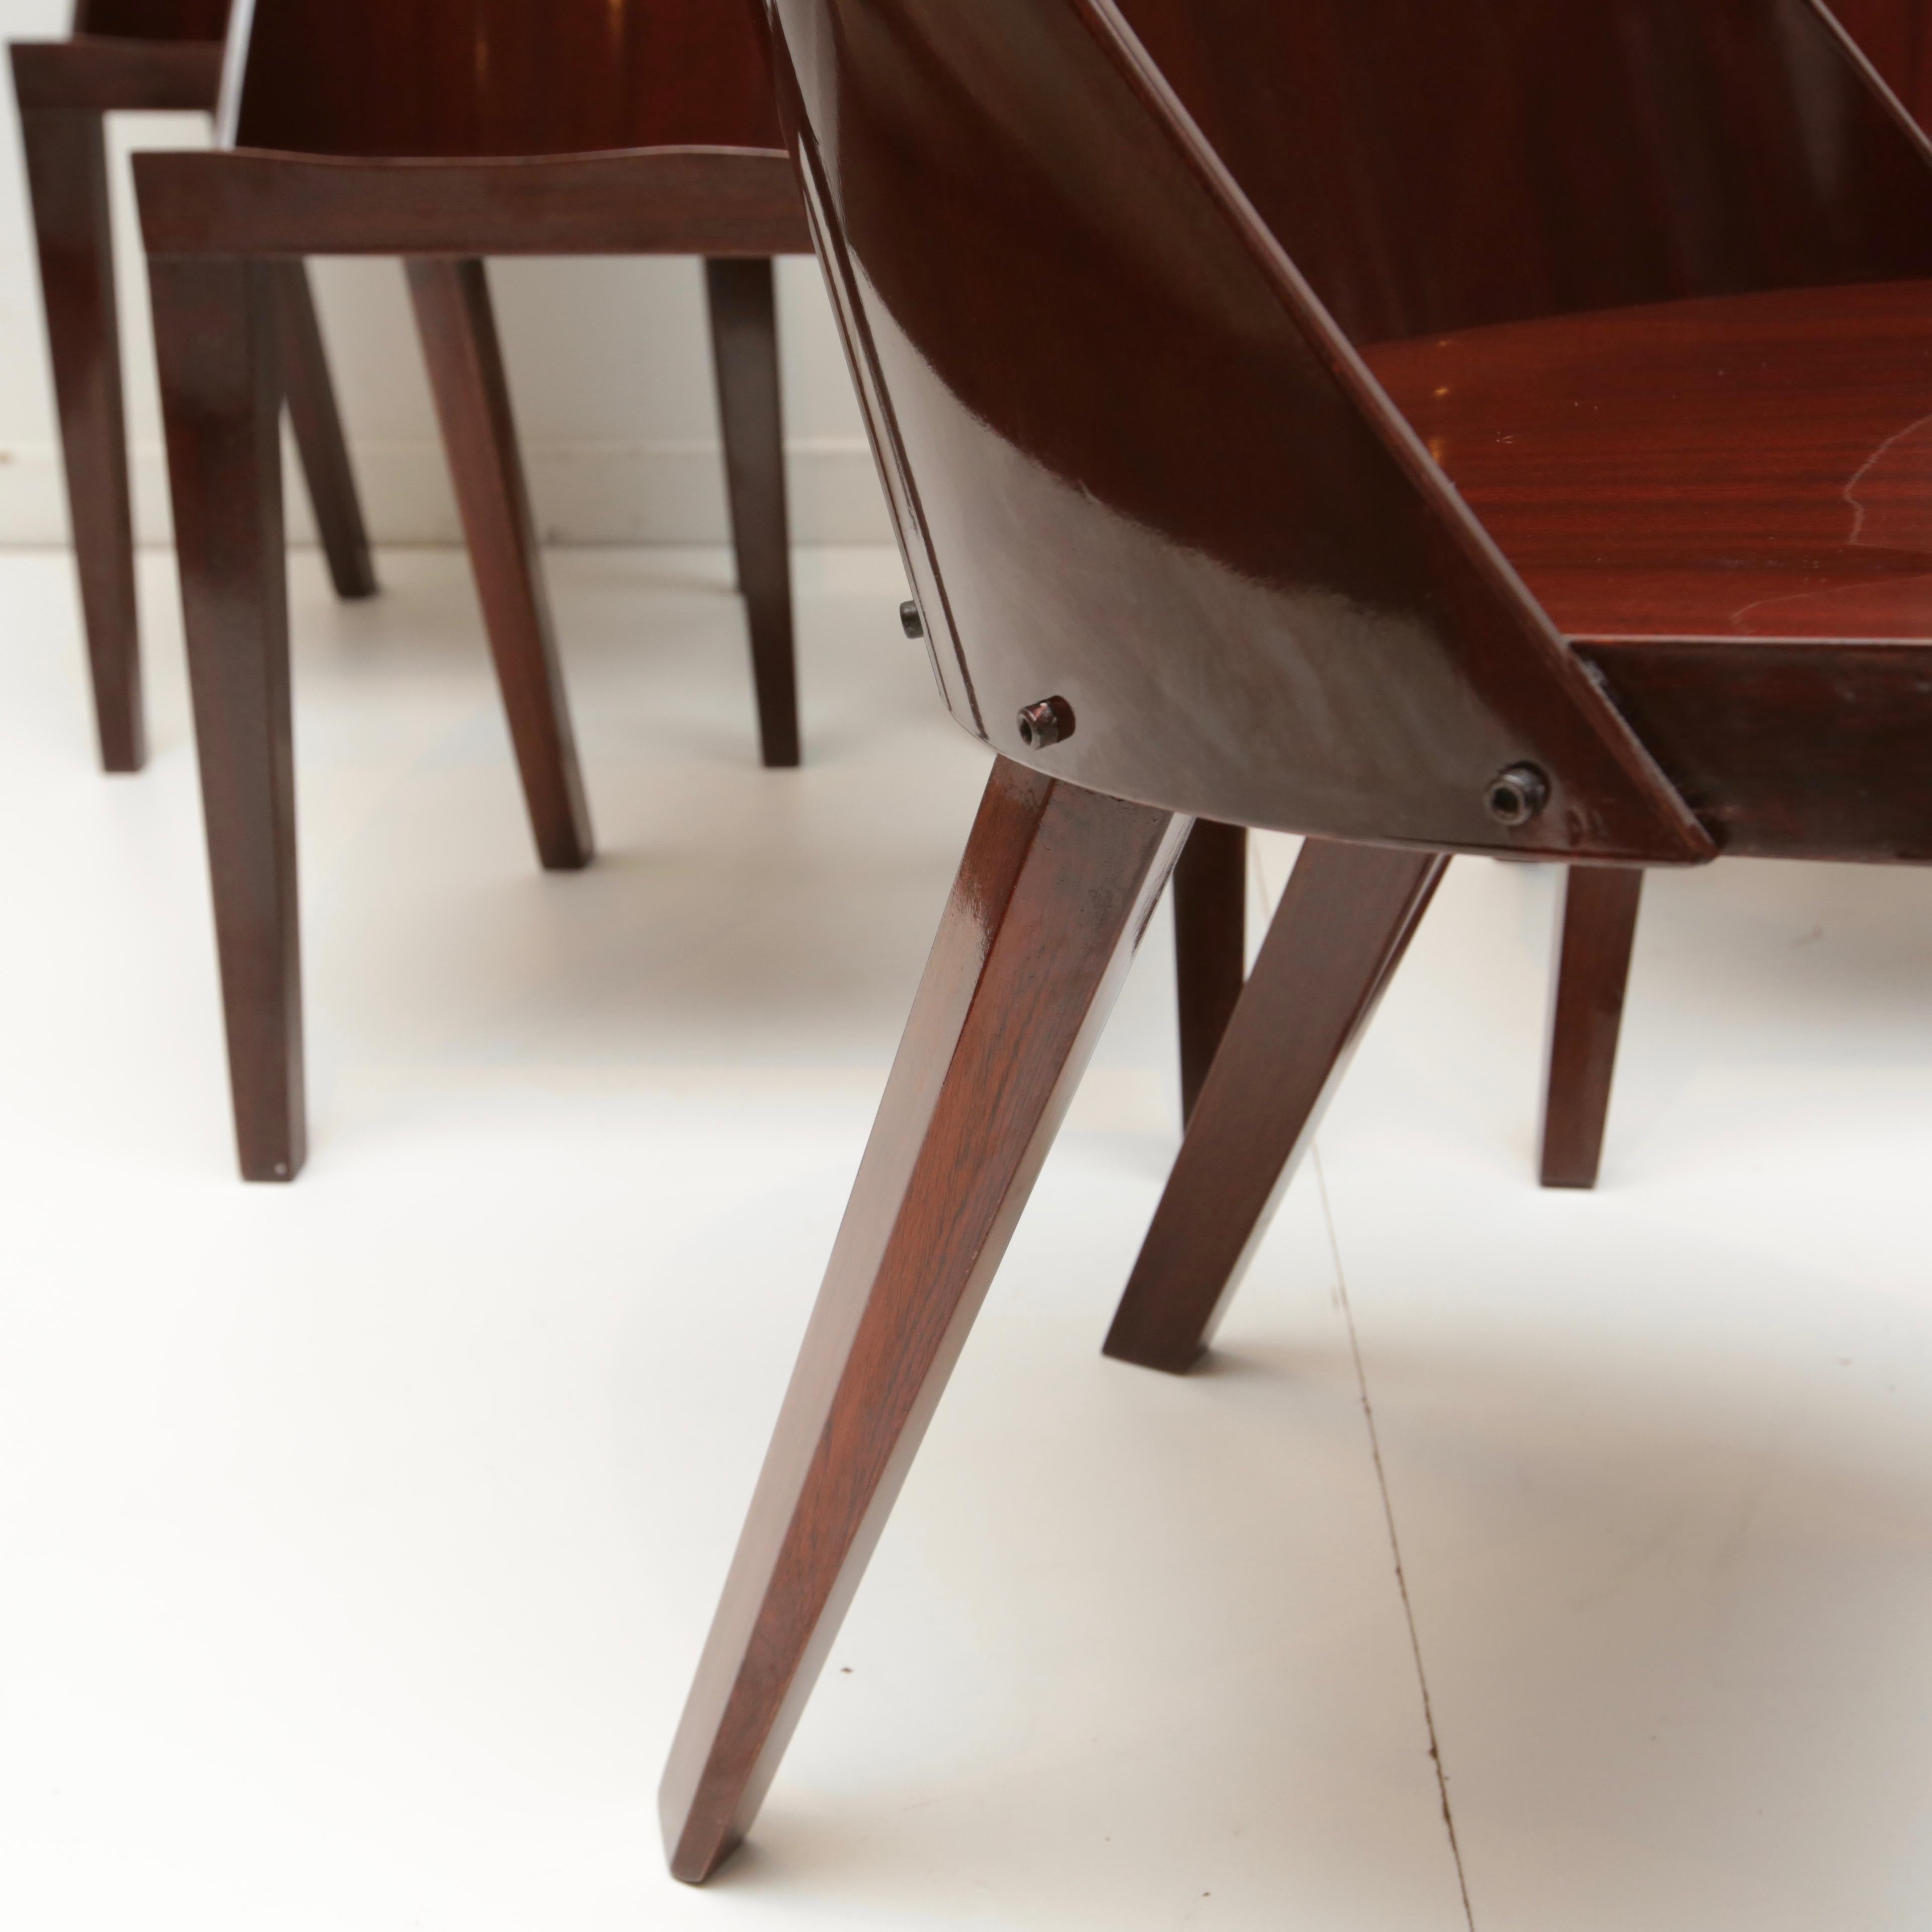 Set of six mahogany veneer chairs designed by Starck for the Royalton Hotel.